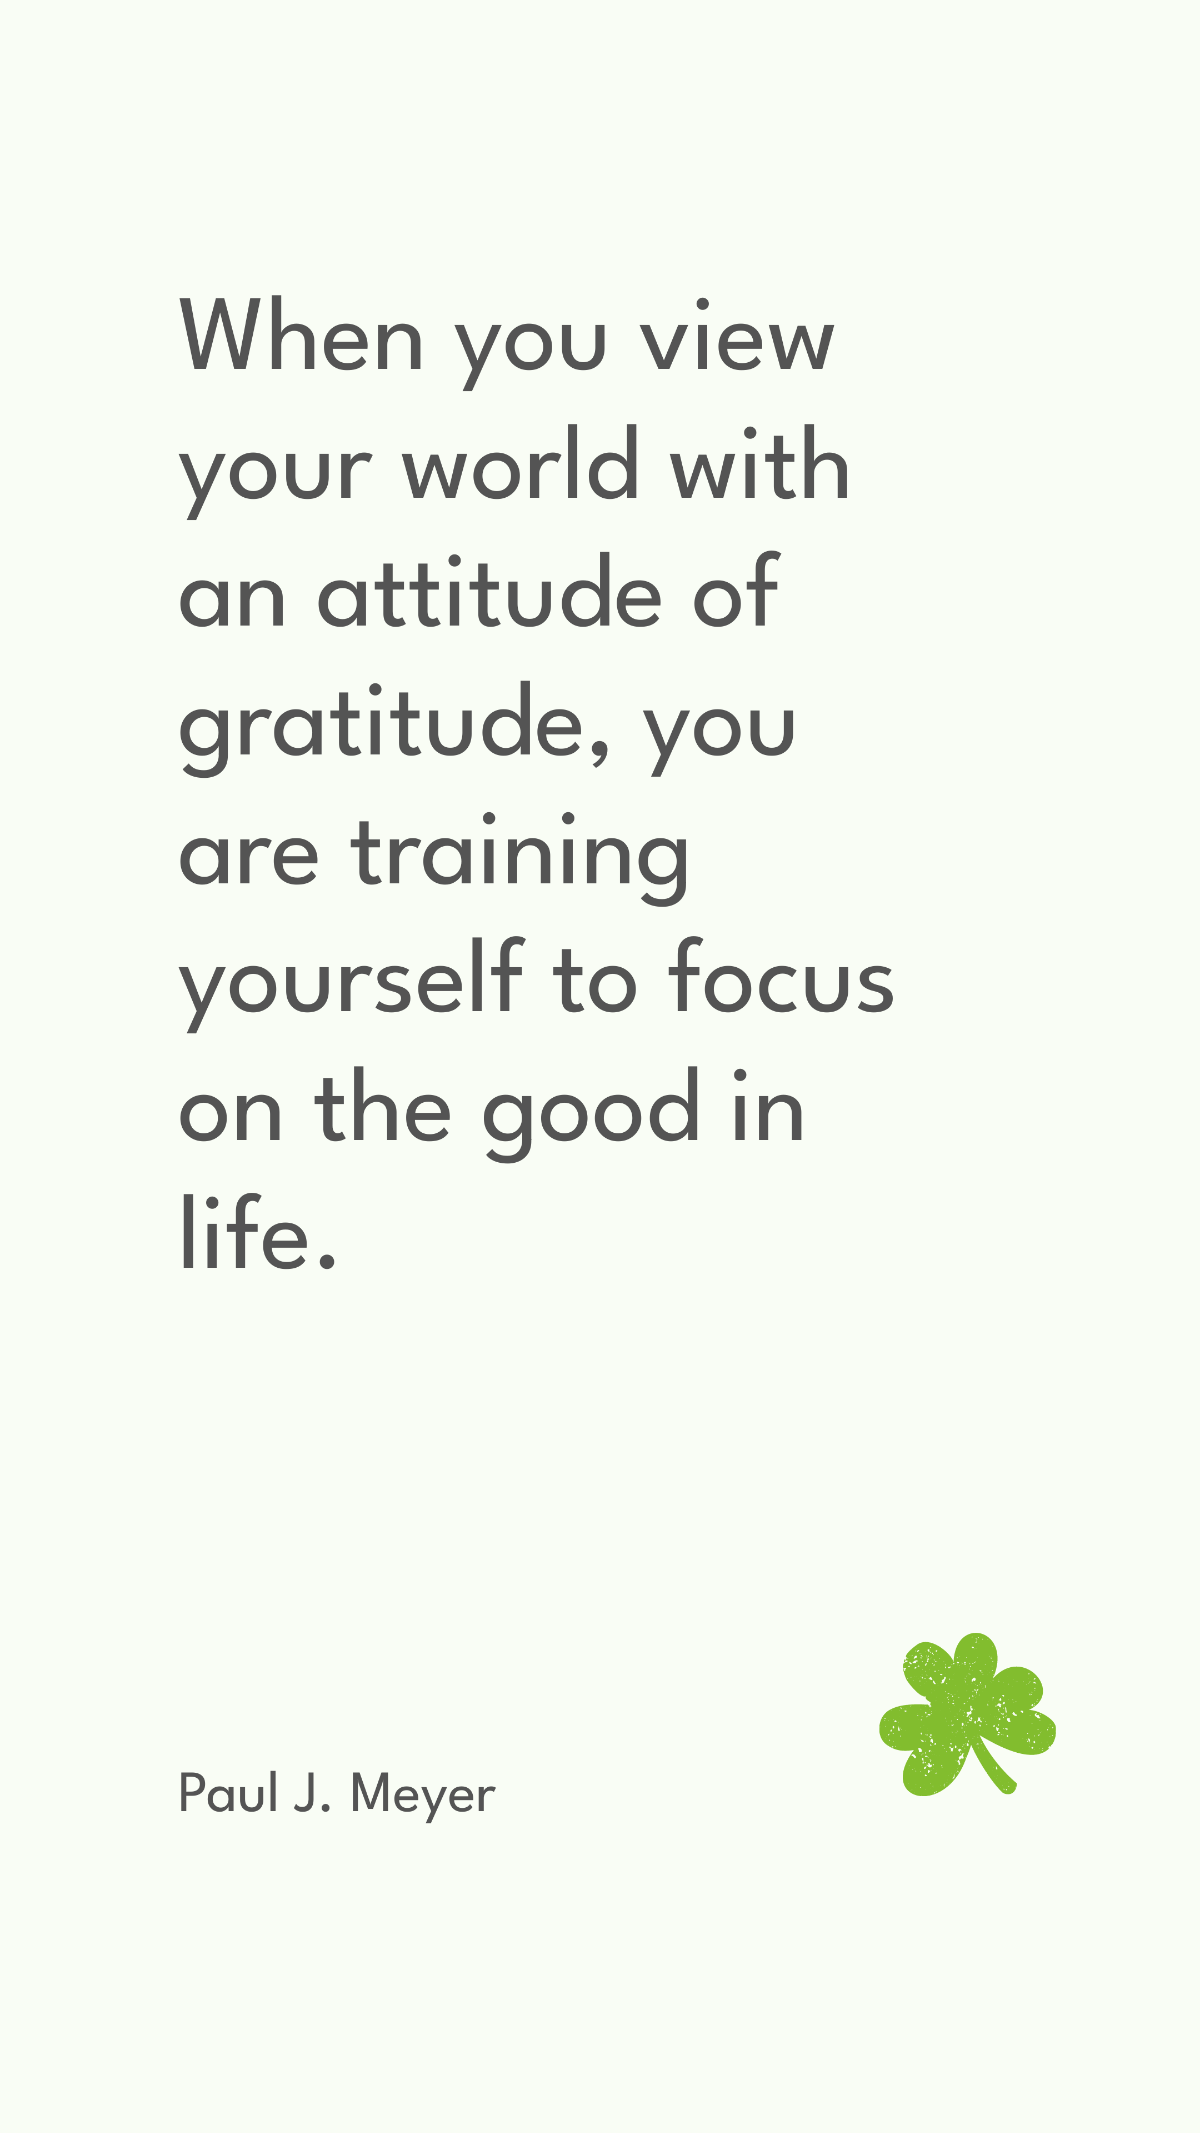 Paul J. Meyer - When you view your world with an attitude of gratitude, you are training yourself to focus on the good in life. Template